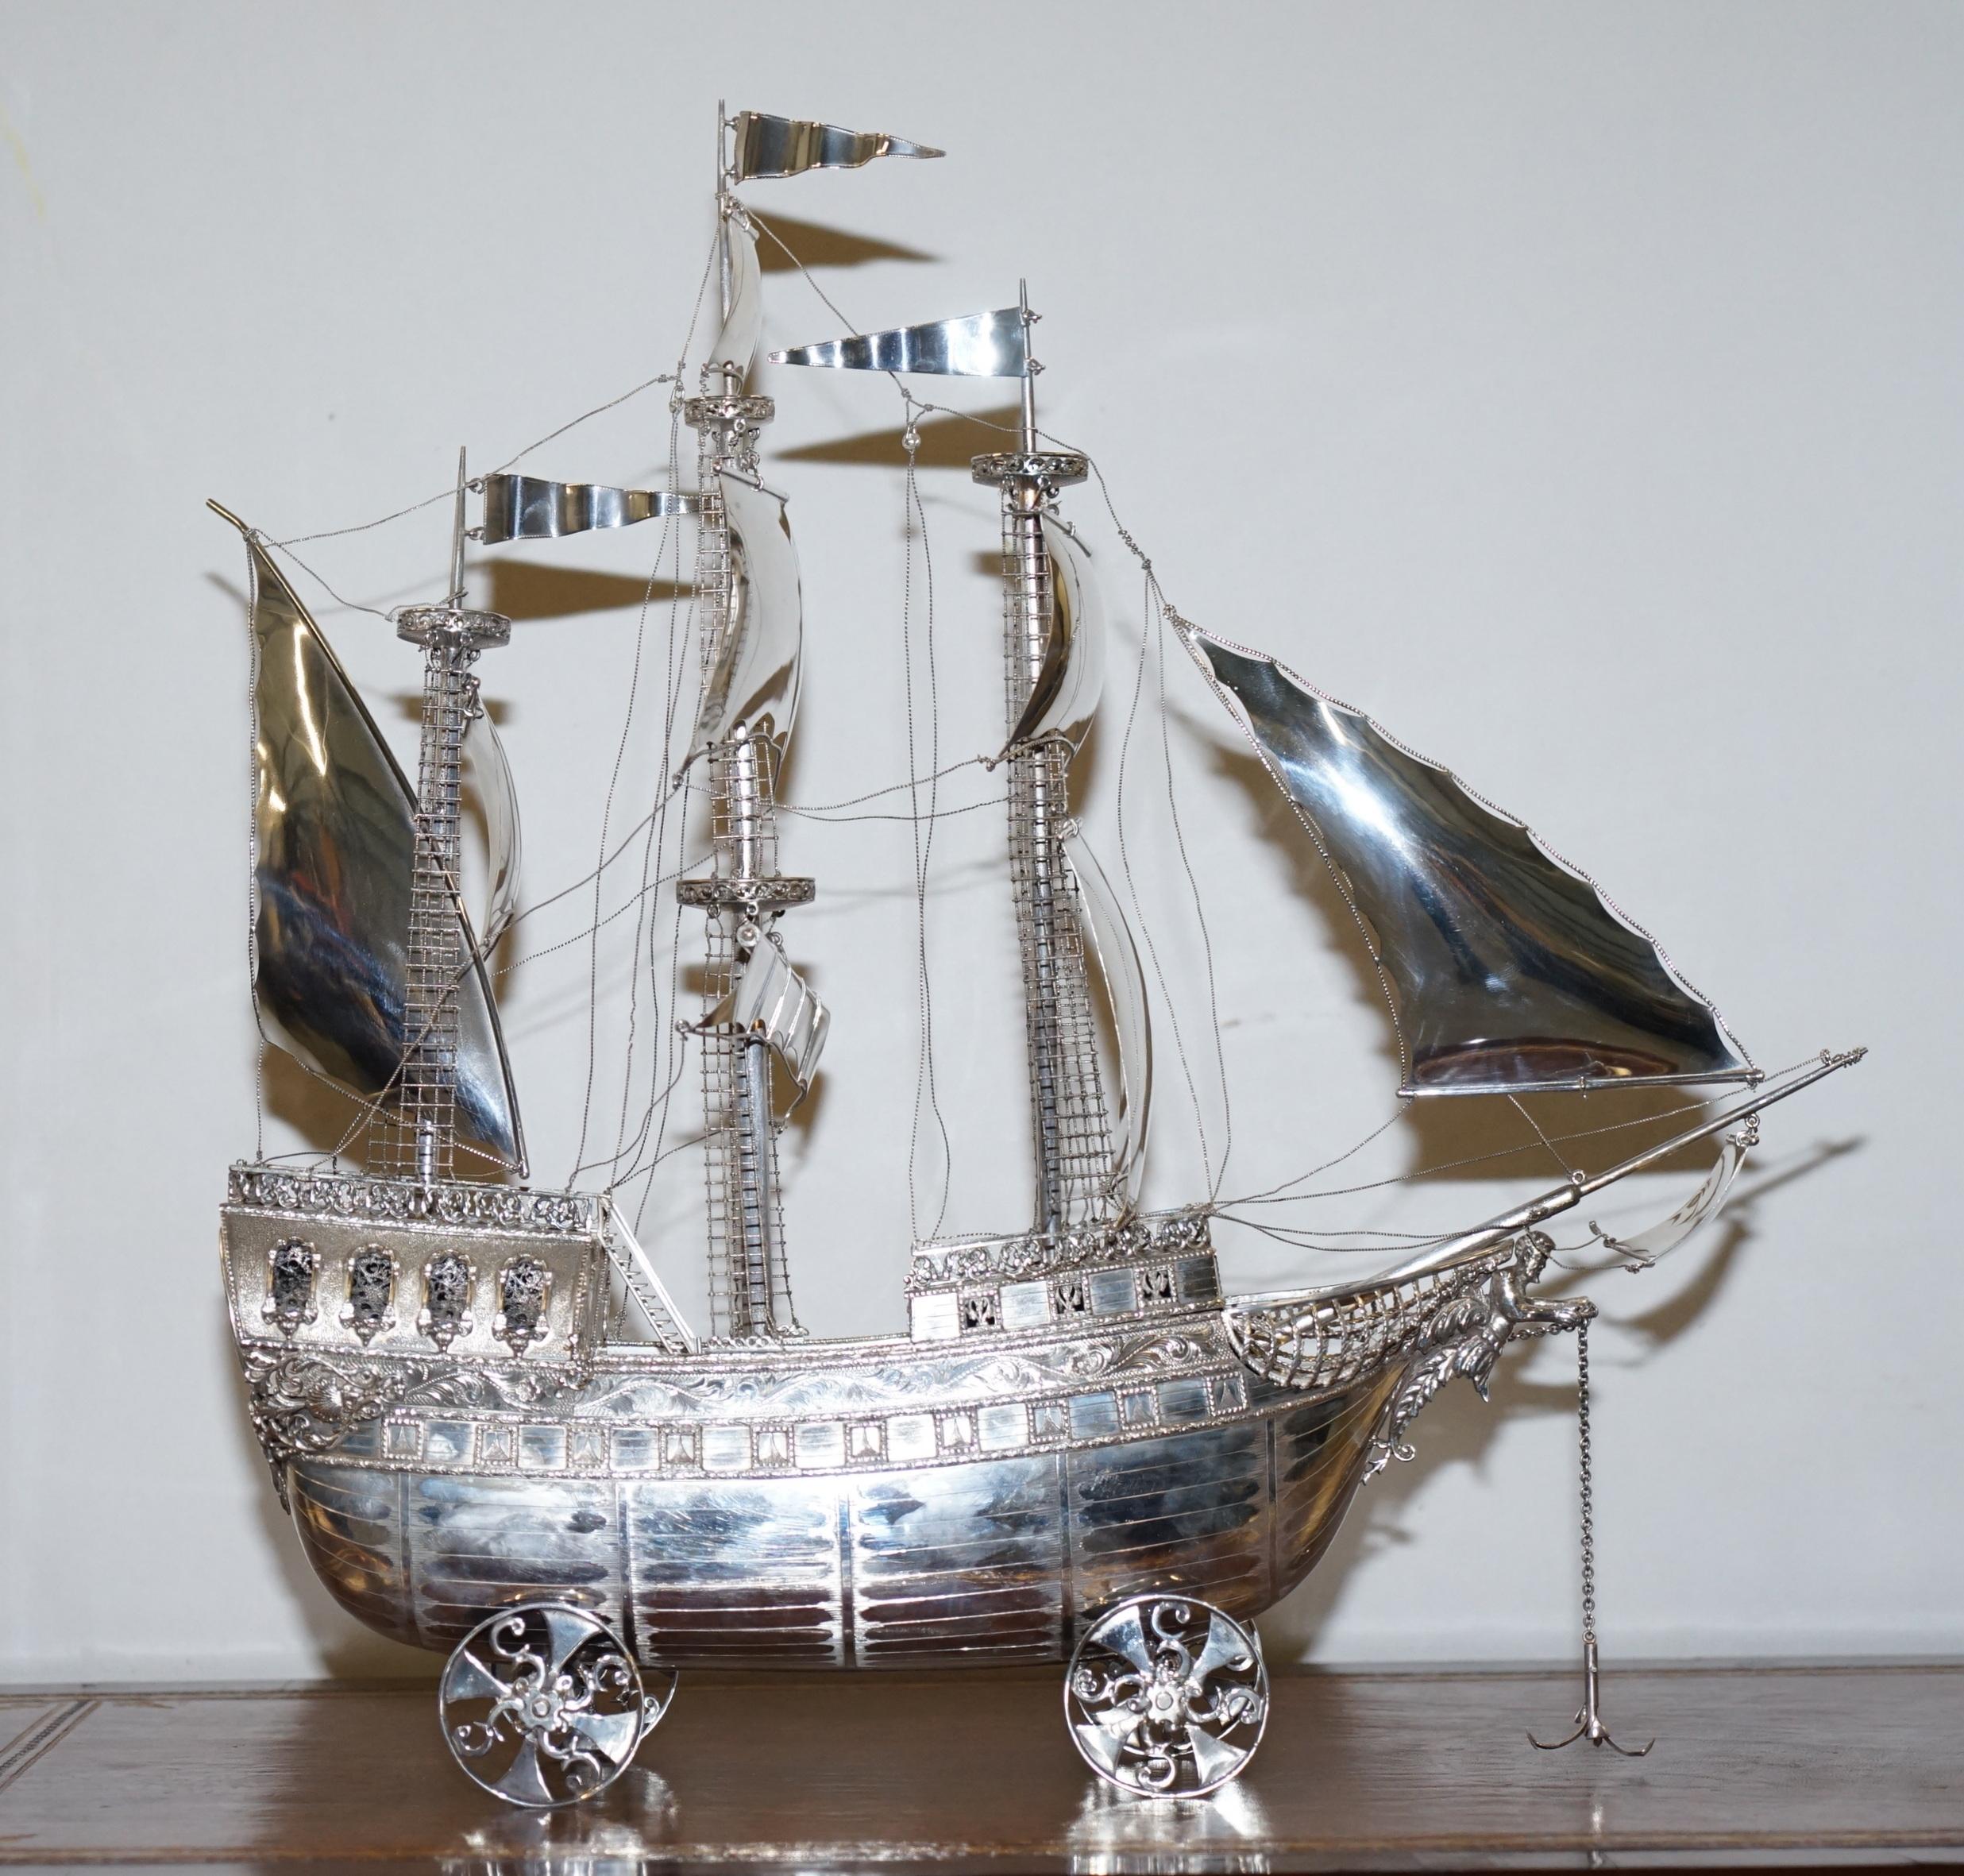 Wimbledon-Furniture

Wimbledon-Furniture is delighted to offer for sale stunning solid 925 Silver NEF ship or boat fully hallmarked with London Import marks for 1977 and made by the International Bullion & Metal Brokers

This is a large scaled very